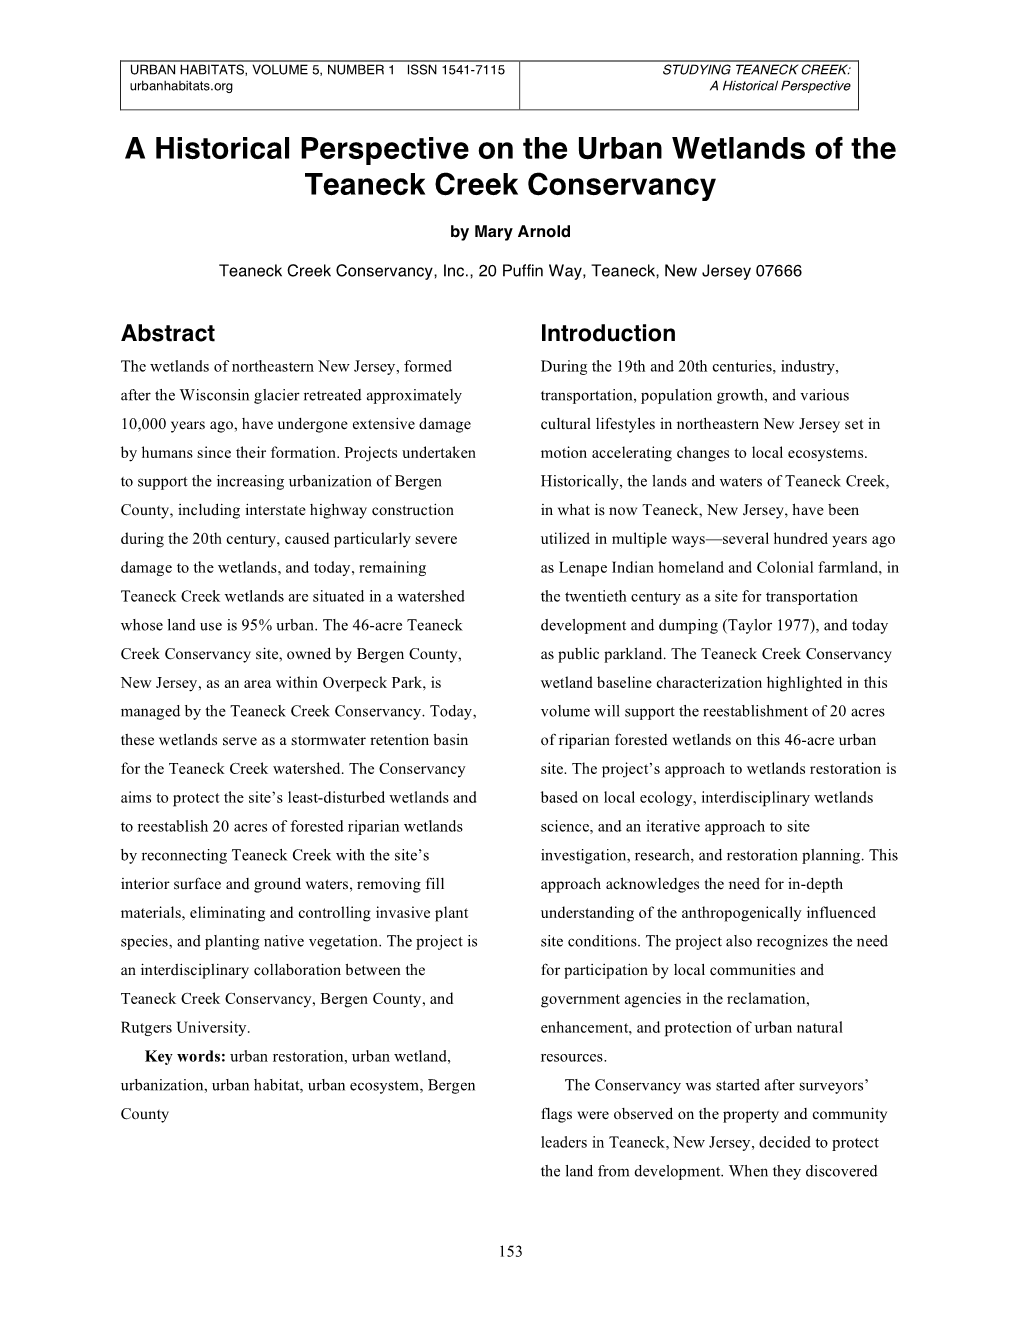 A Historical Perspective on the Urban Wetlands of the Teaneck Creek Conservancy